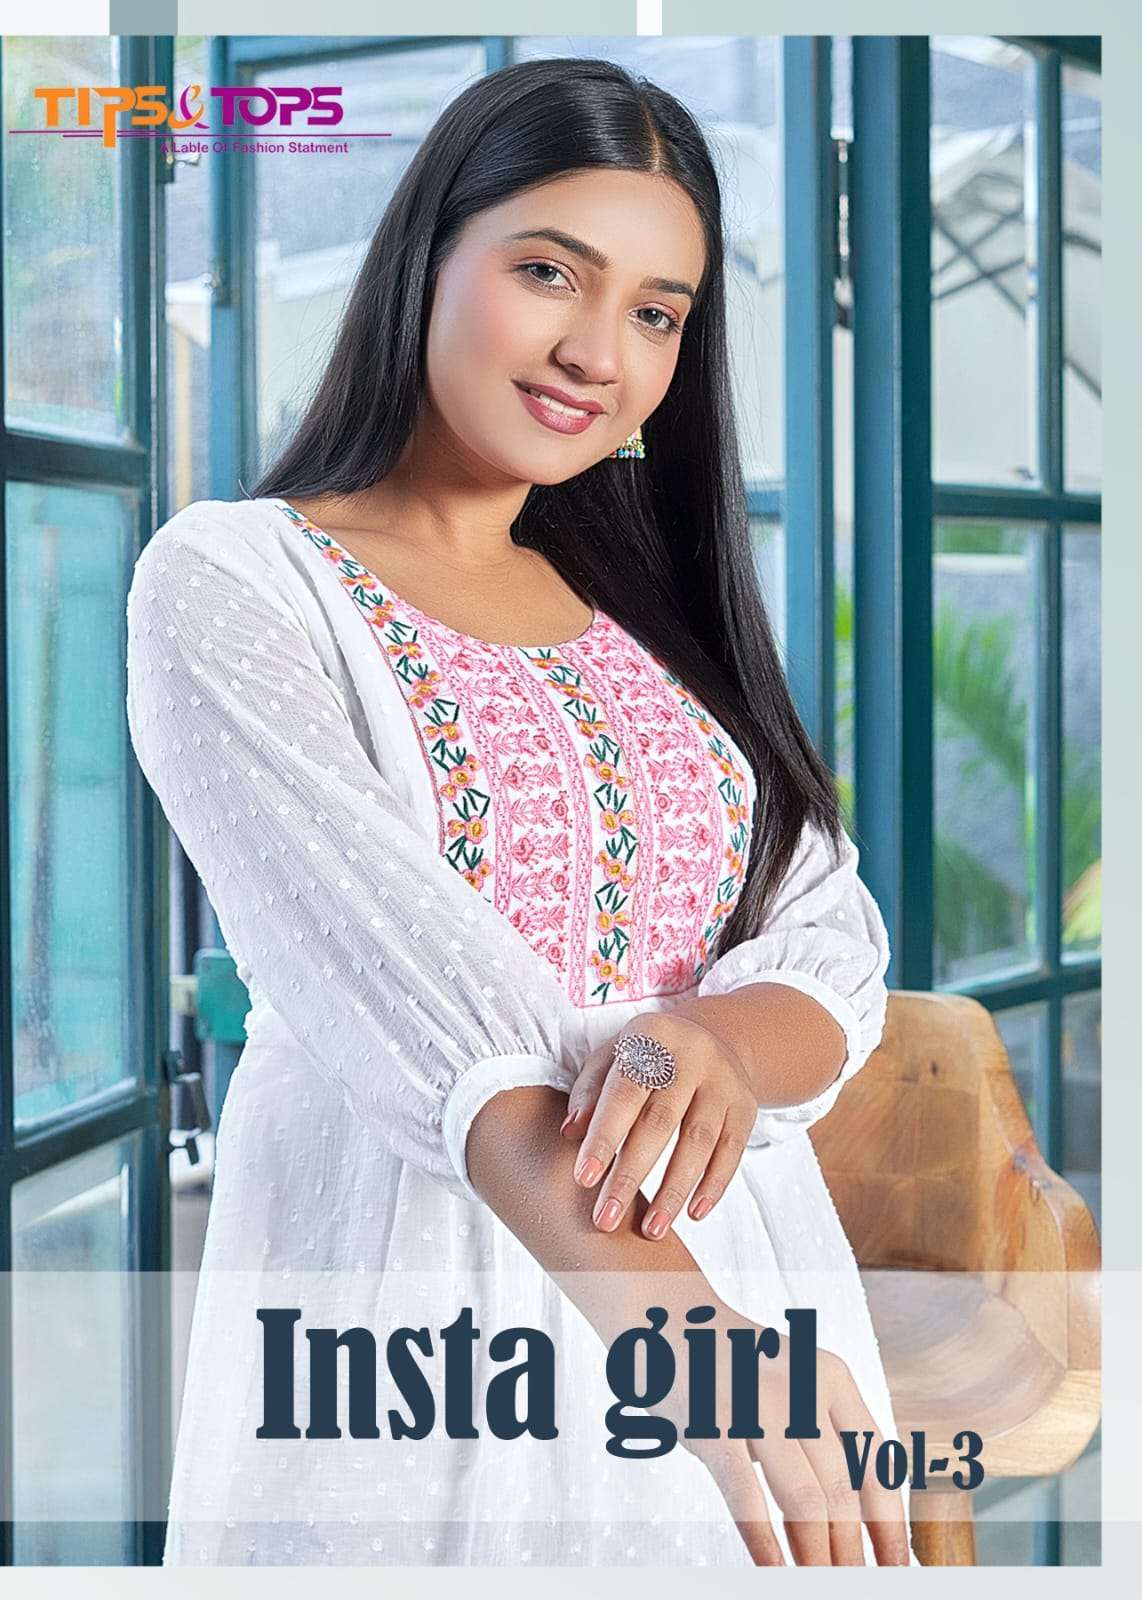 Tips & tops insta girl vol 3 georgette jacquard tunic tops